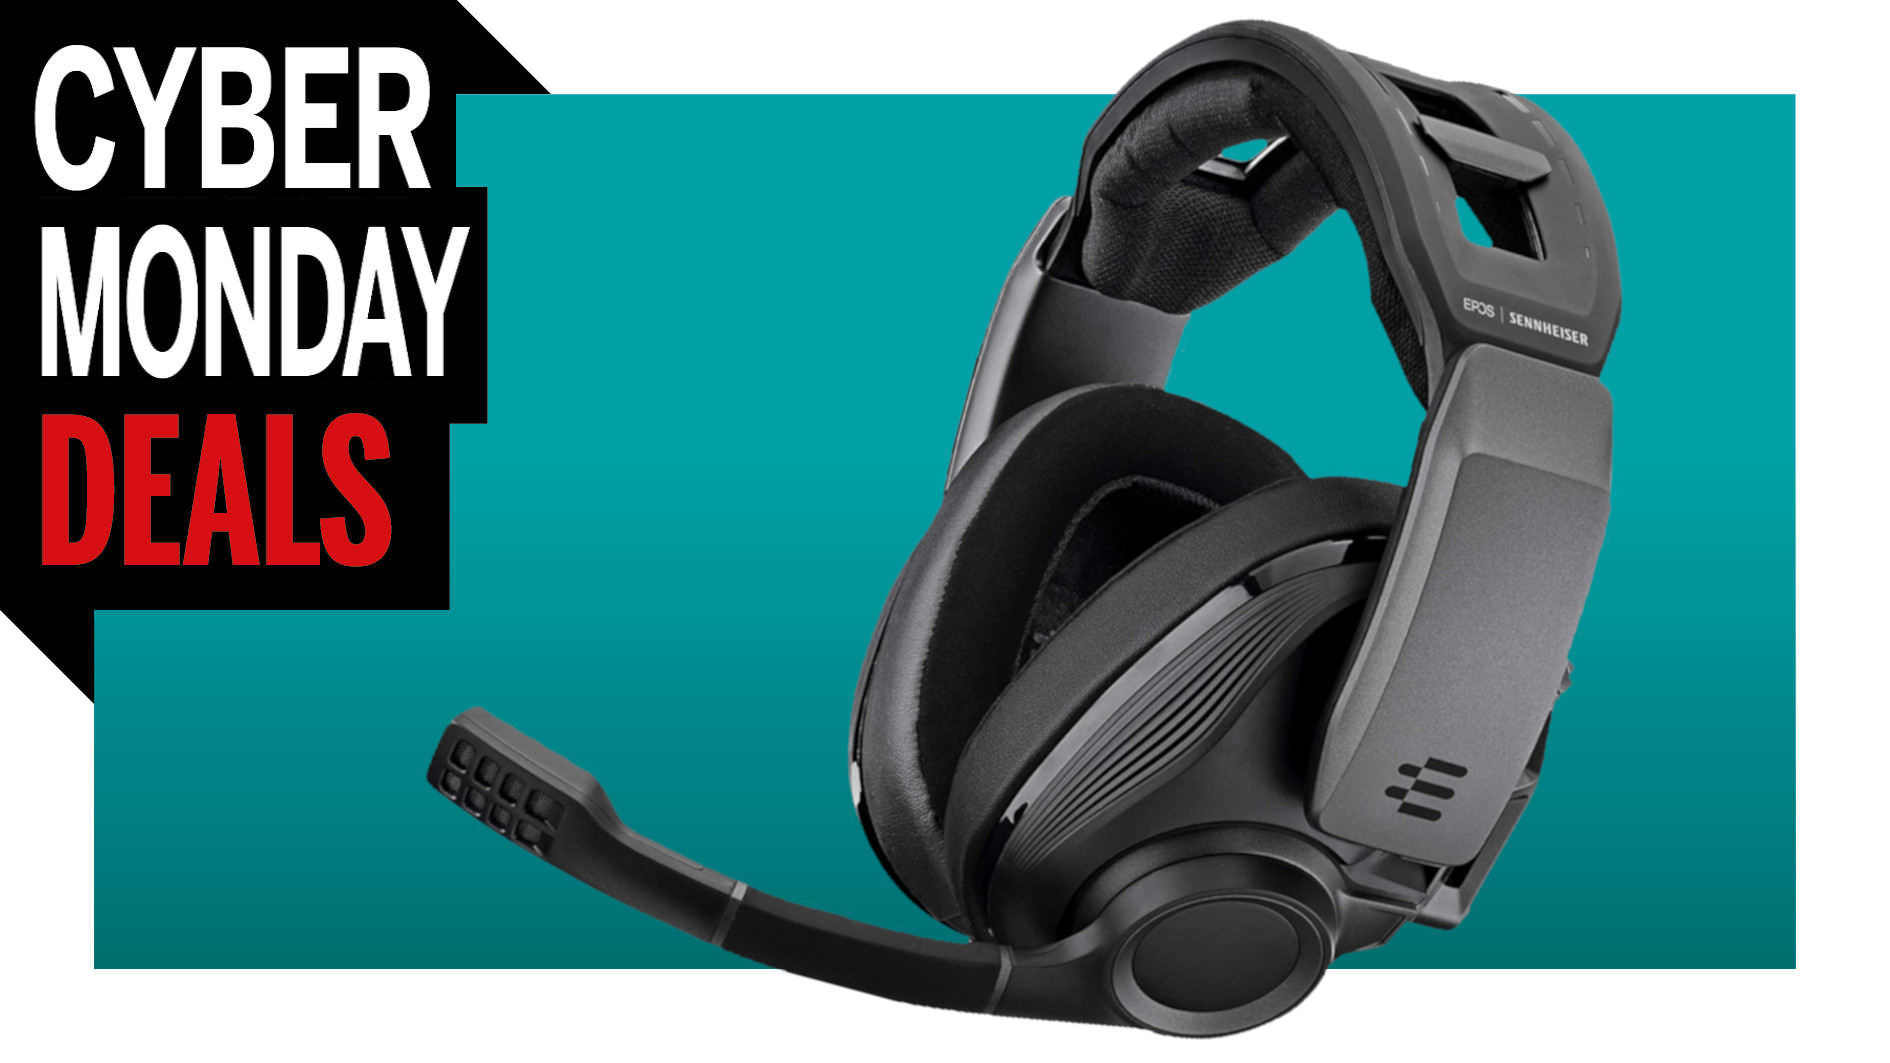 Save $120 On One Of The Best Wireless Headsets In This Cyber Monday Gaming Headset Deal thumbnail